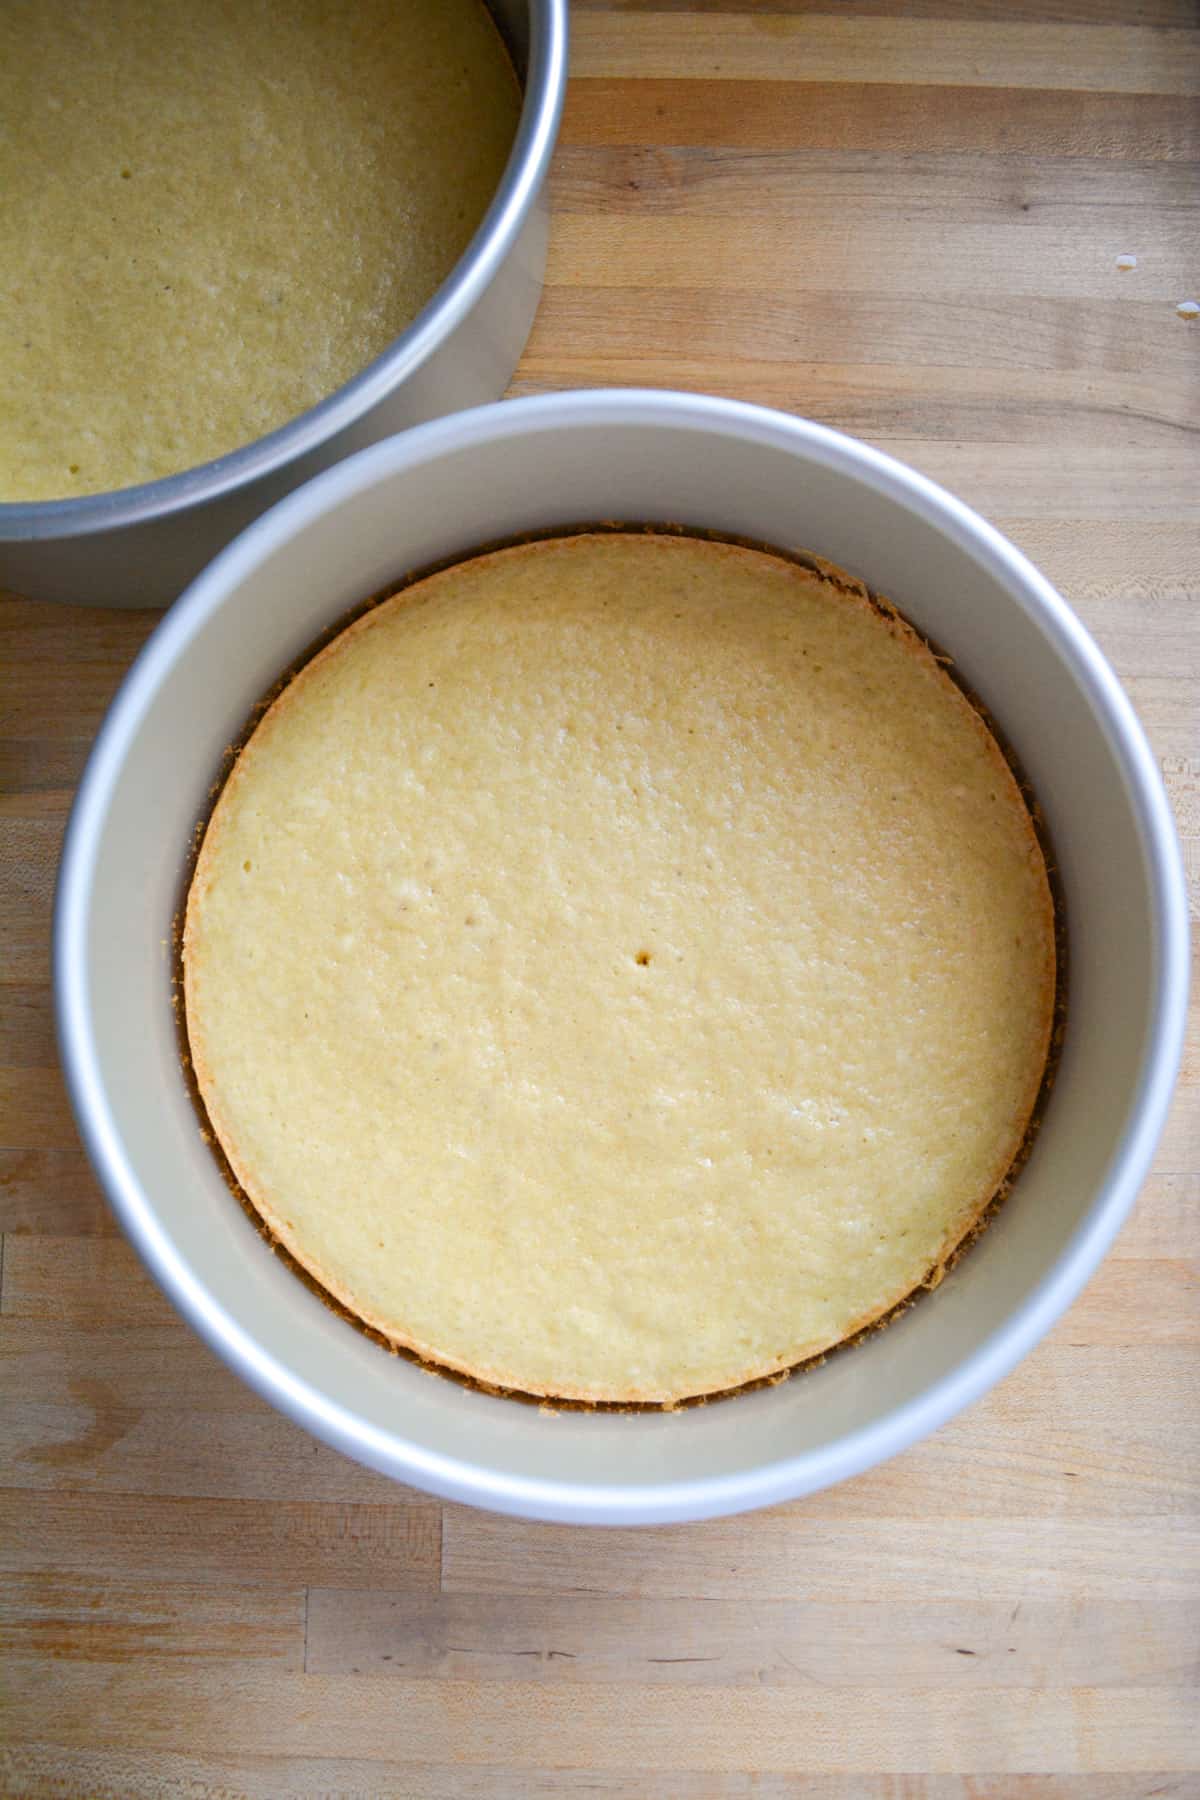 Baked cakes in their cake pans.